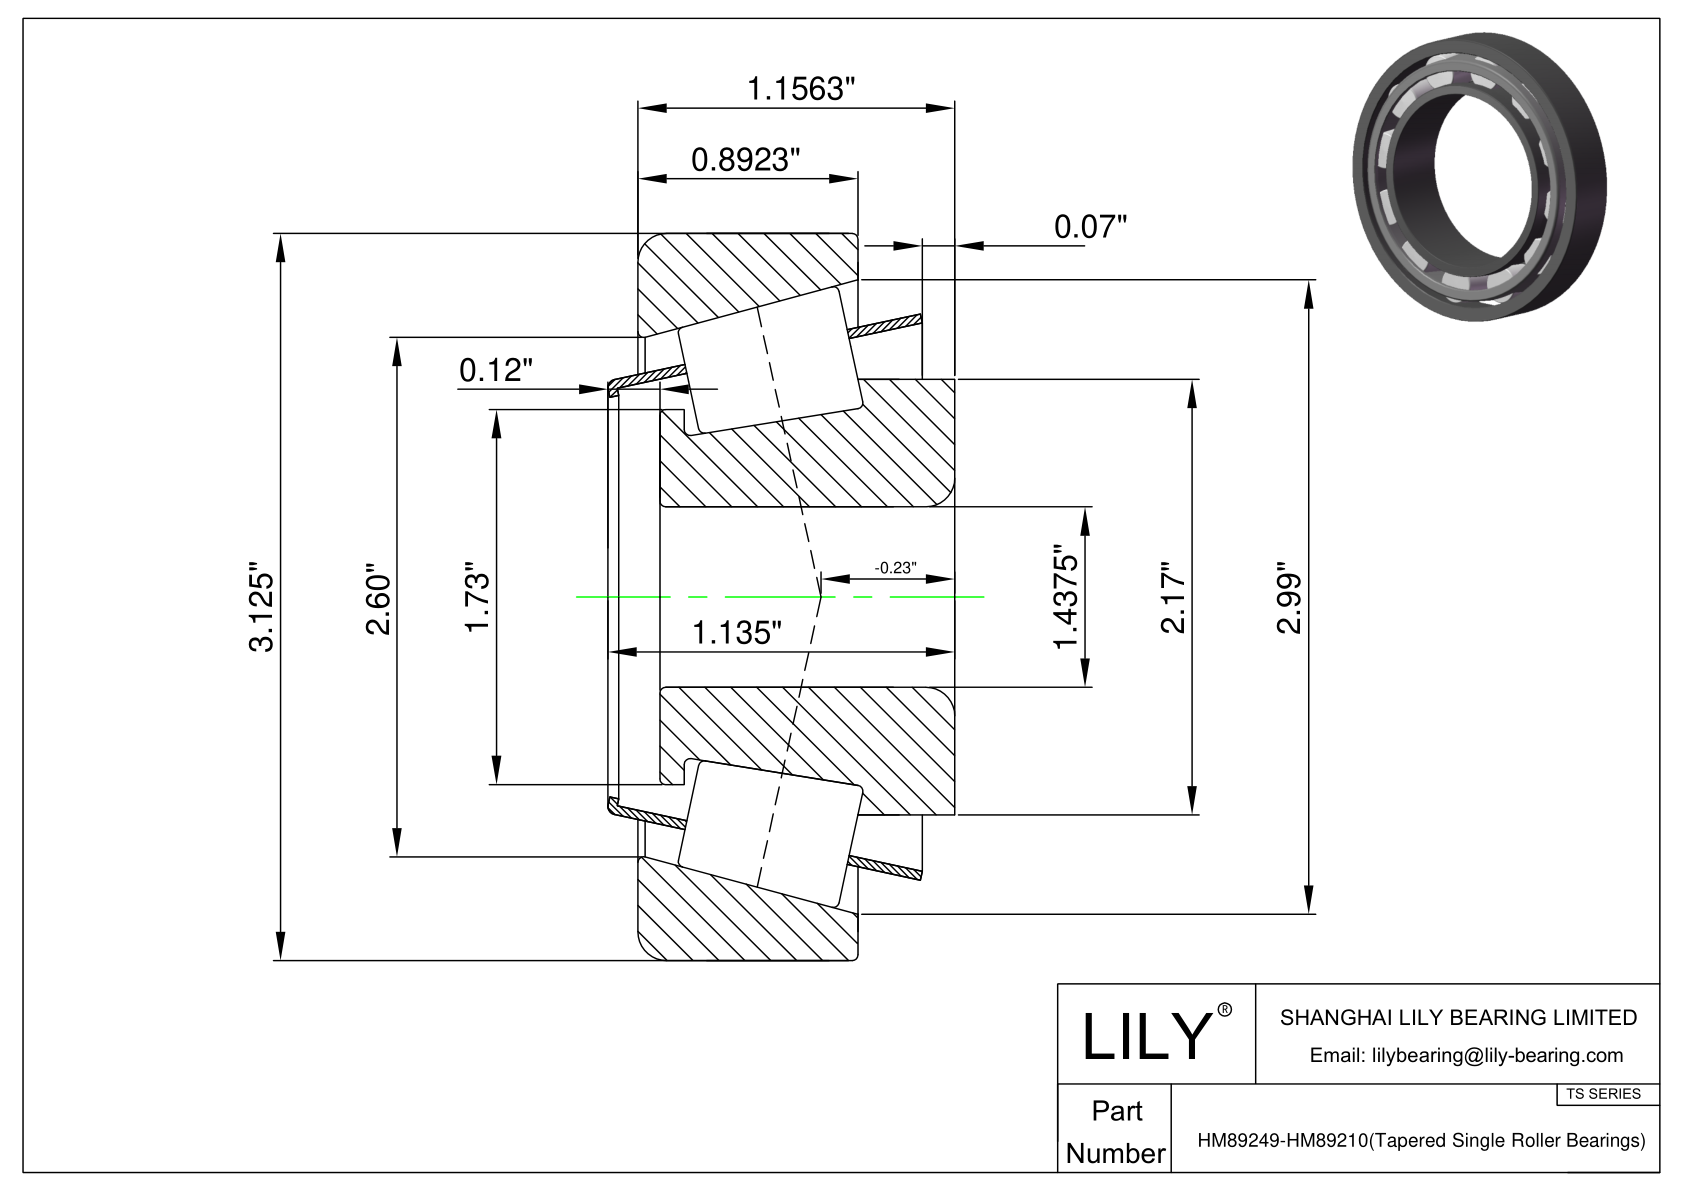 HM89249-HM89210 TS (Tapered Single Roller Bearings) (Imperial) cad drawing